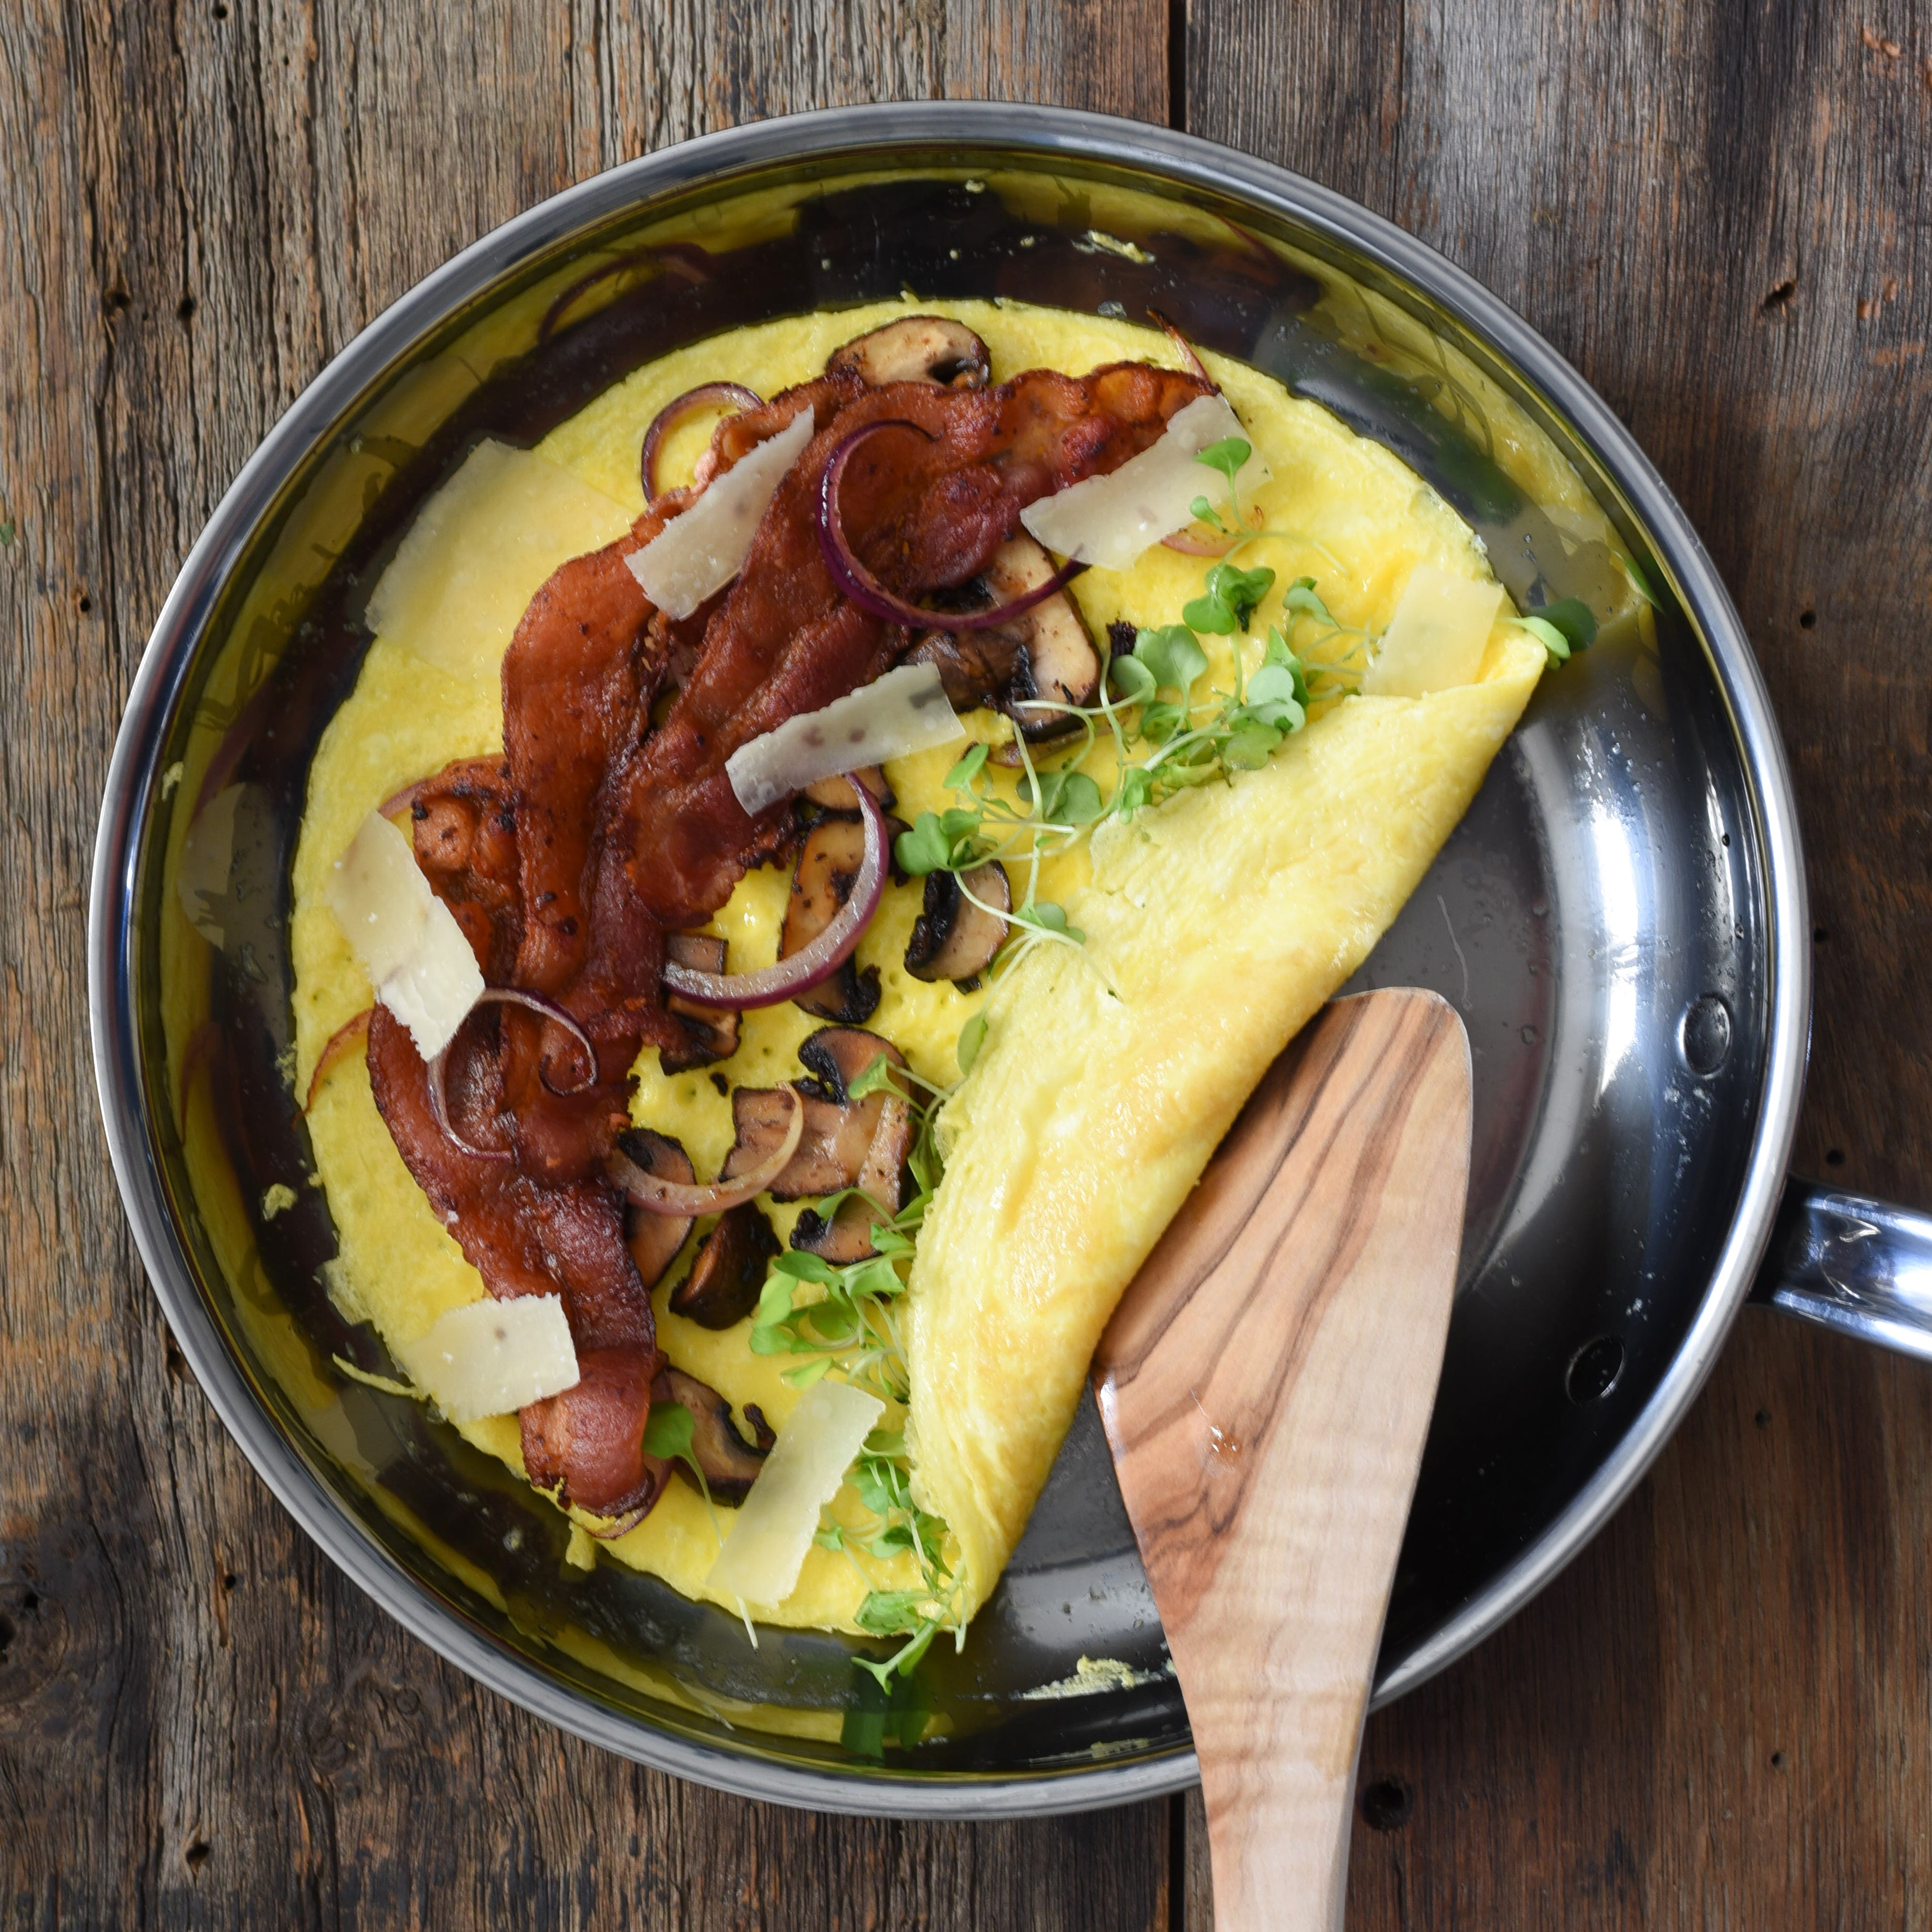 How to Make A Perfect Egg Omelette in Stainless Steel Frying Pan